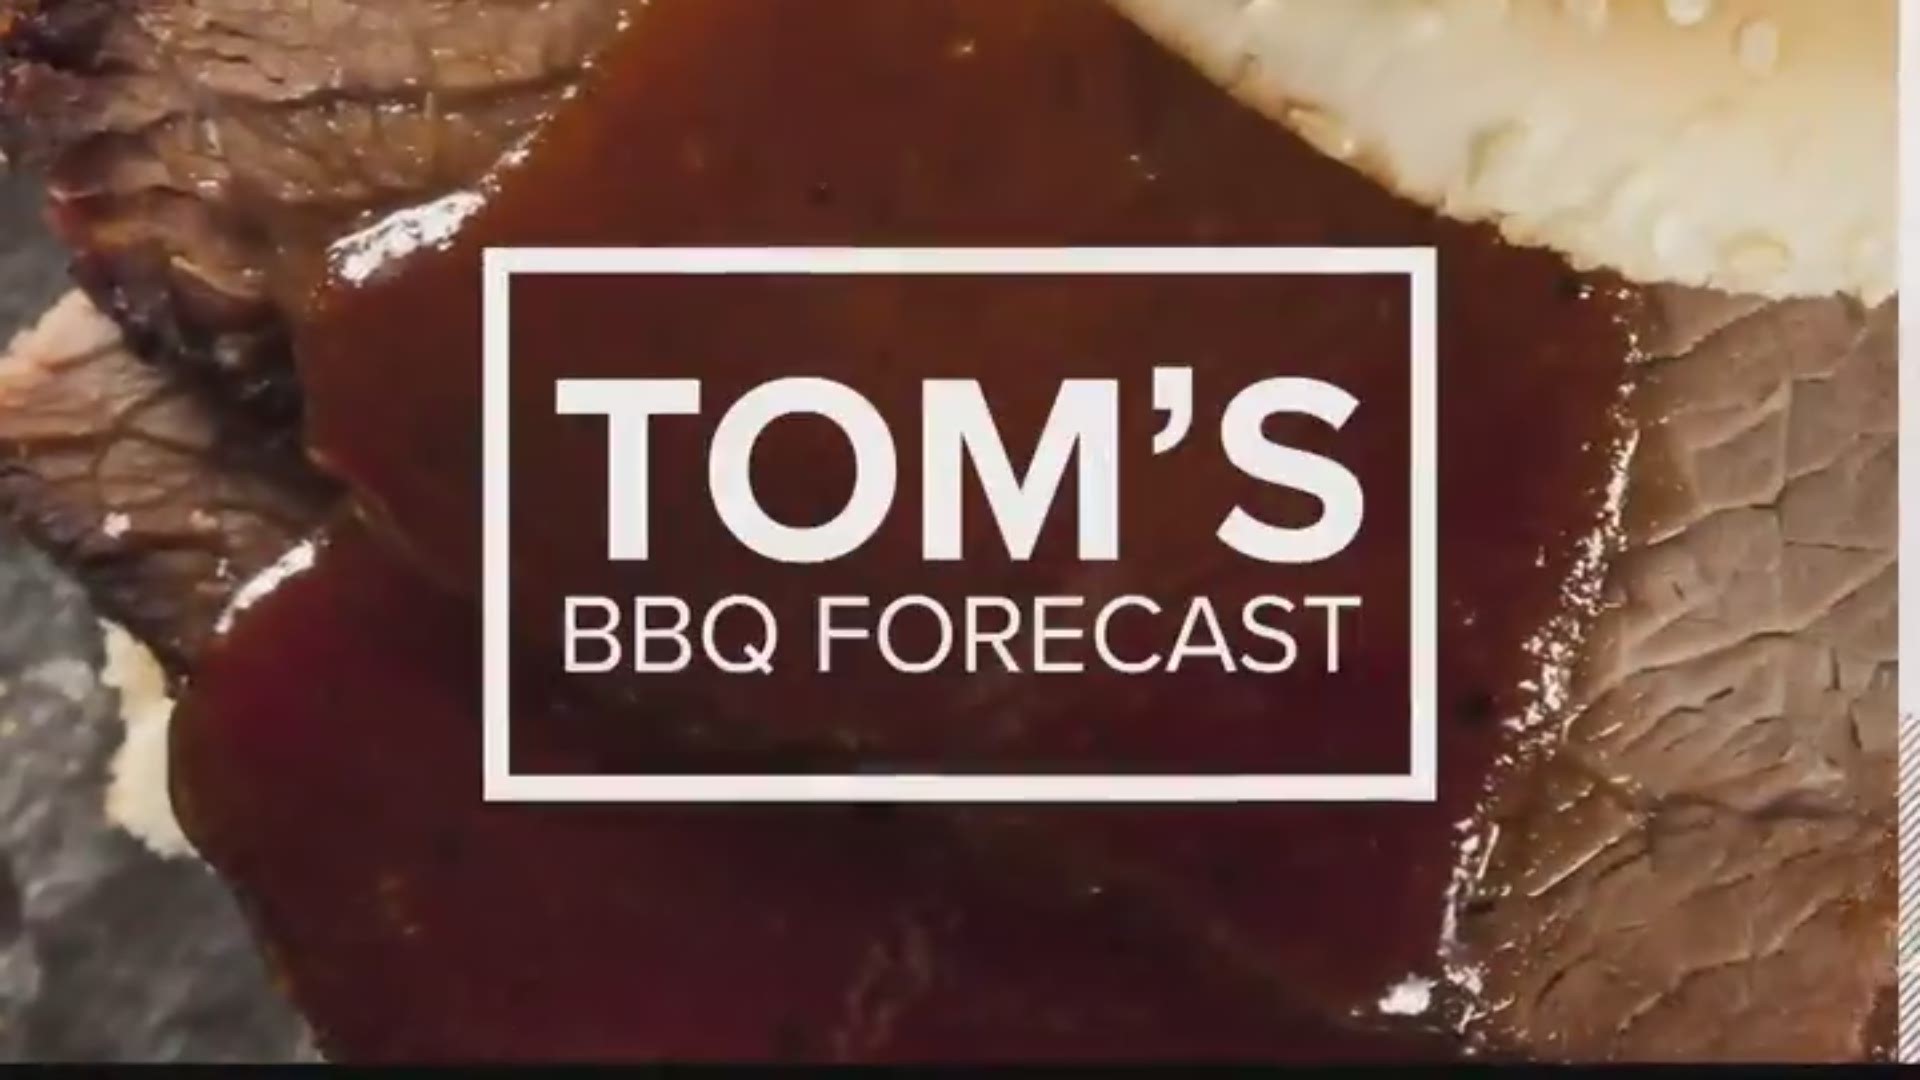 Tom's BBQ Forecast: It's Time for Some Steak